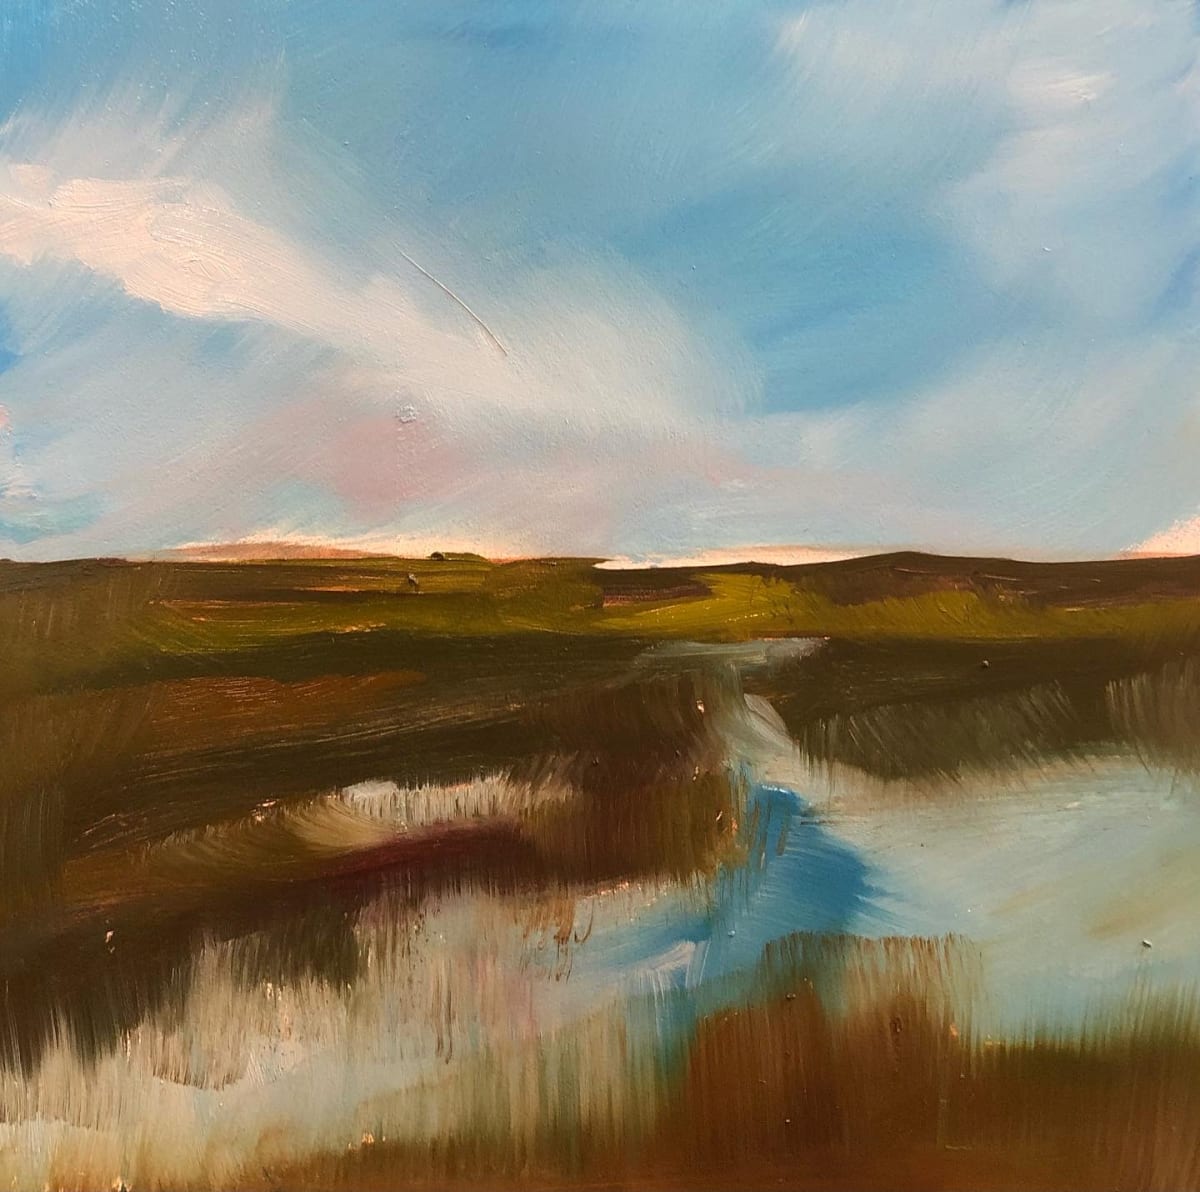 small scape-low country #9 by Rebecca Jacob  Image: Scape Sketch Collection-special places on my journey of life

scape sketch-low country #9

6x6 oil on ampersand museum gesso panel 2022

This painting was inspired by the views of the marshlands in the low country of South Carolina.